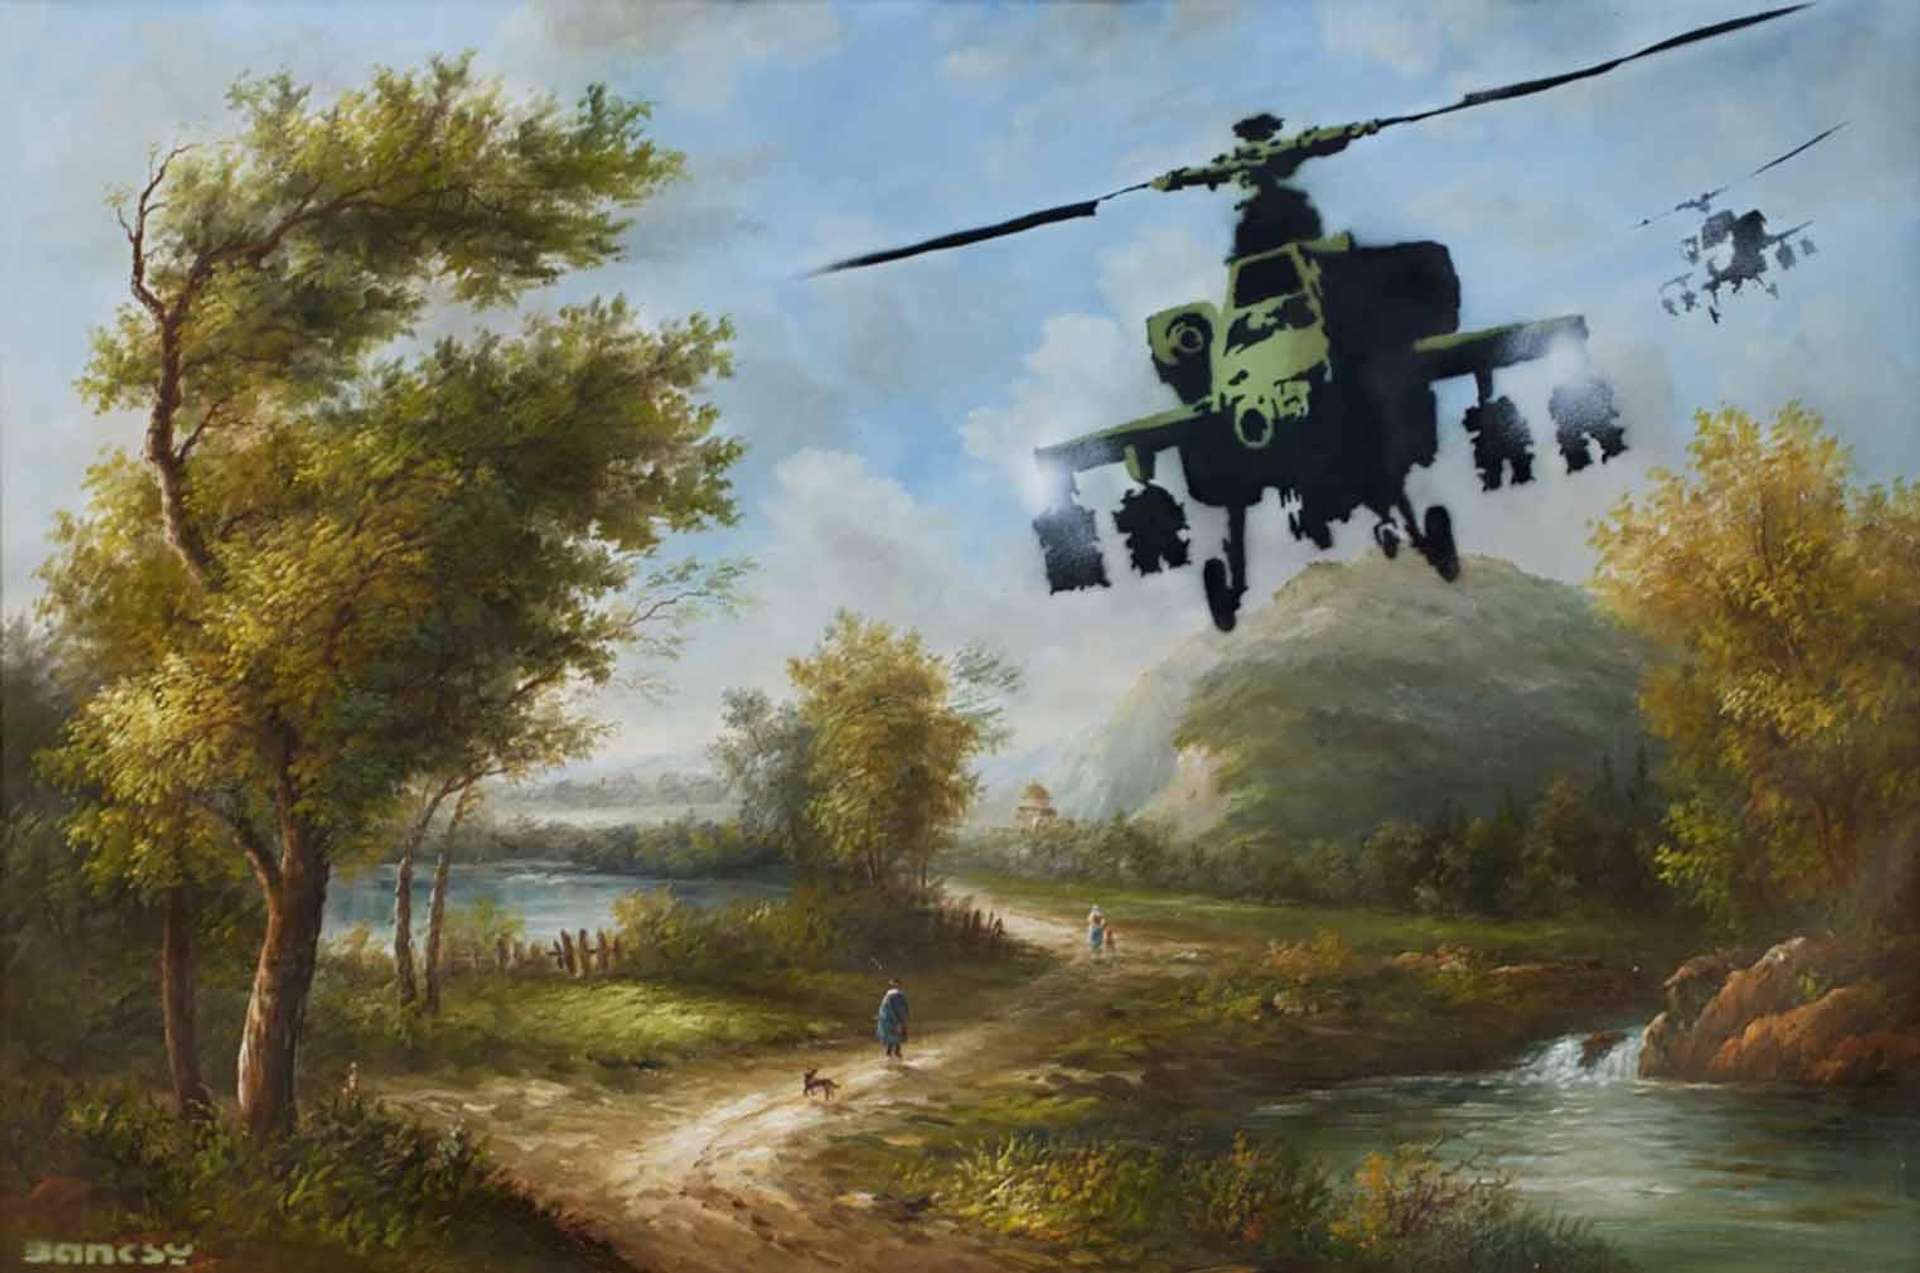 A classic oil painting of a landscape disrupted by Banksy, with a spray painted chopper helicopter in the top right of the composition.